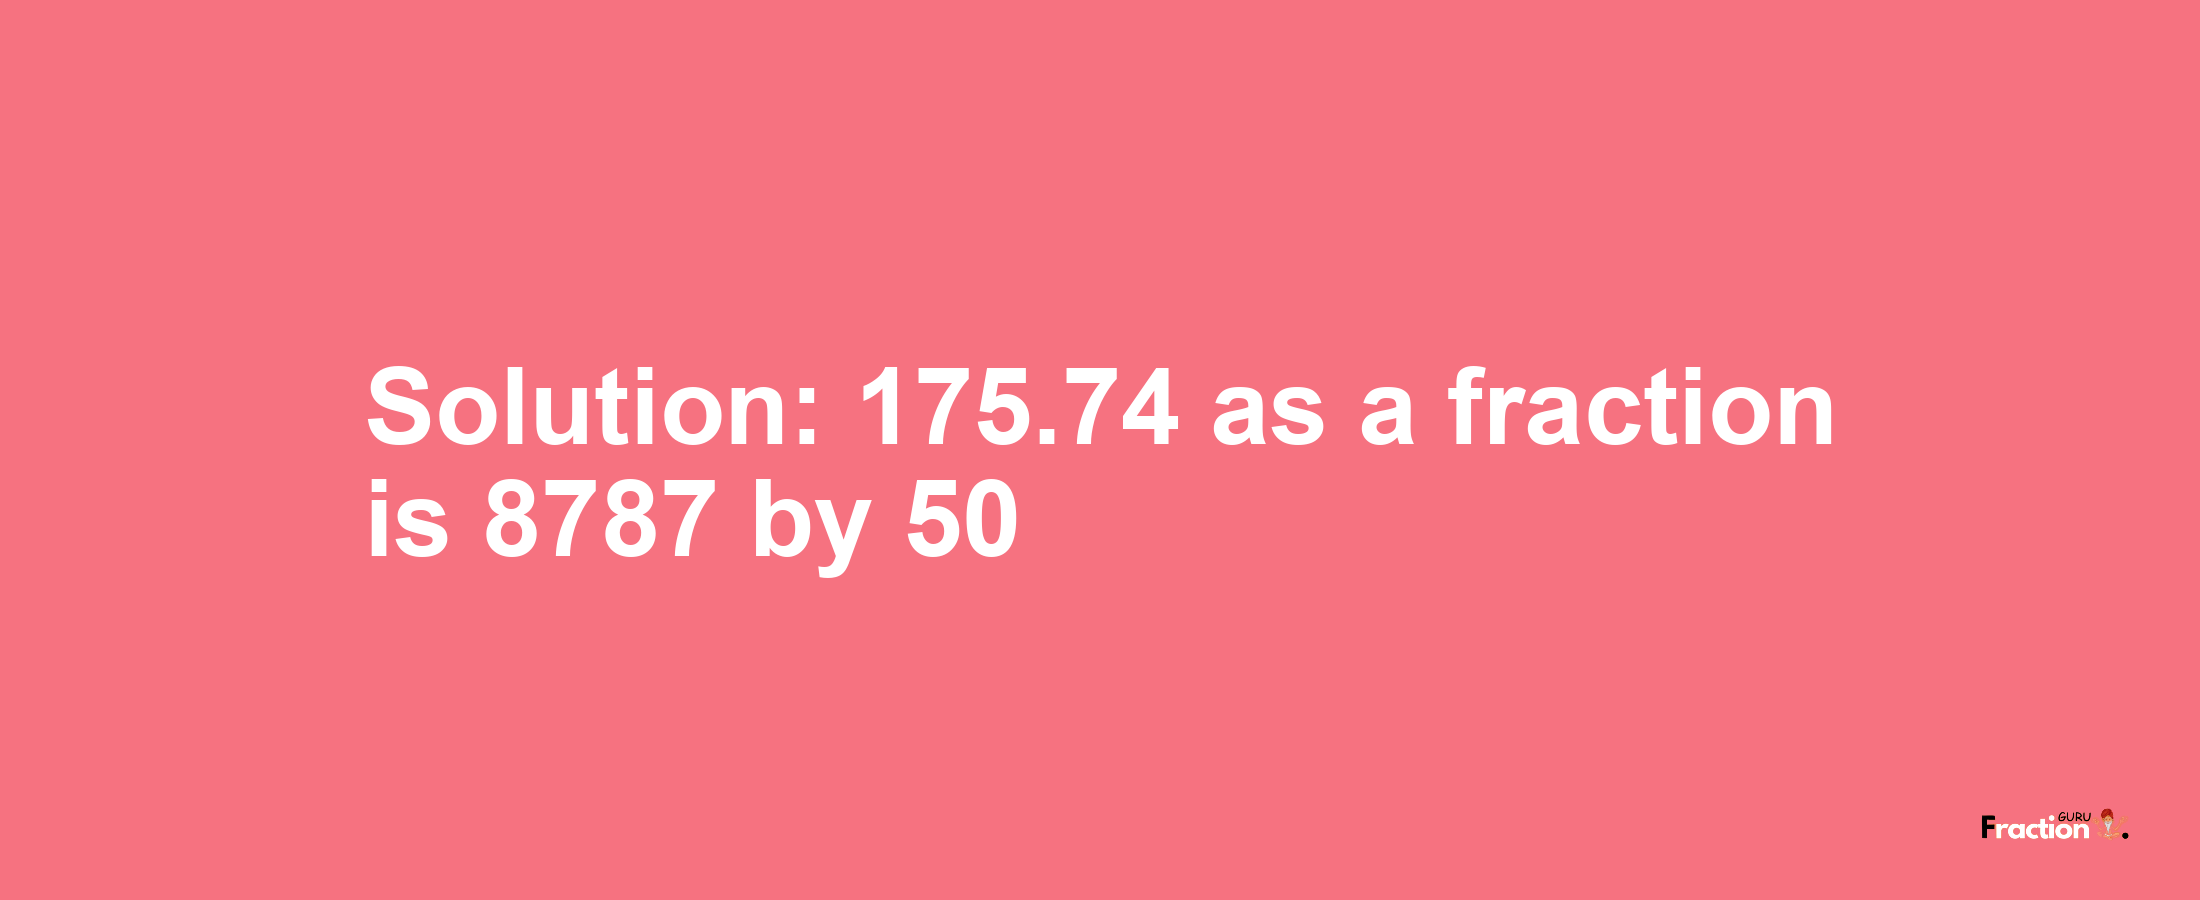 Solution:175.74 as a fraction is 8787/50